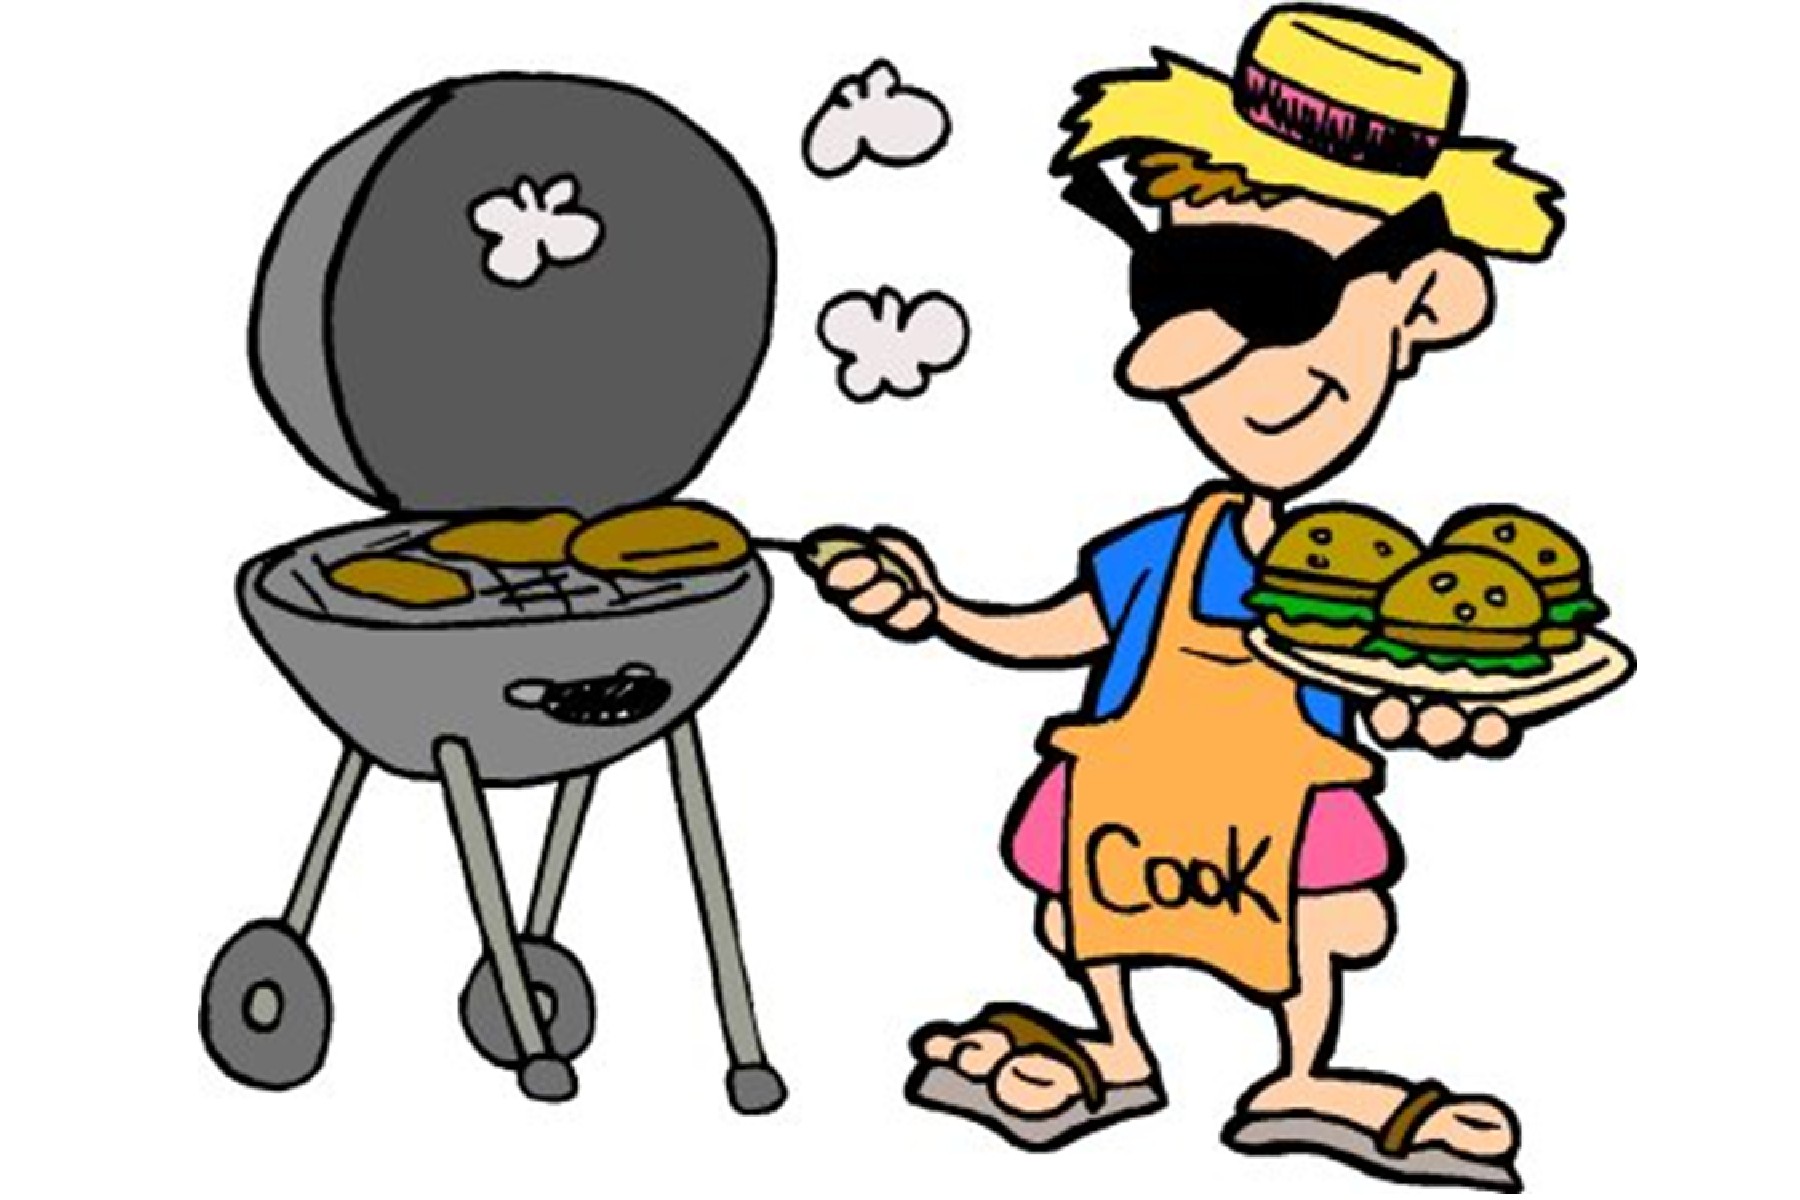 cookout clipart youth news